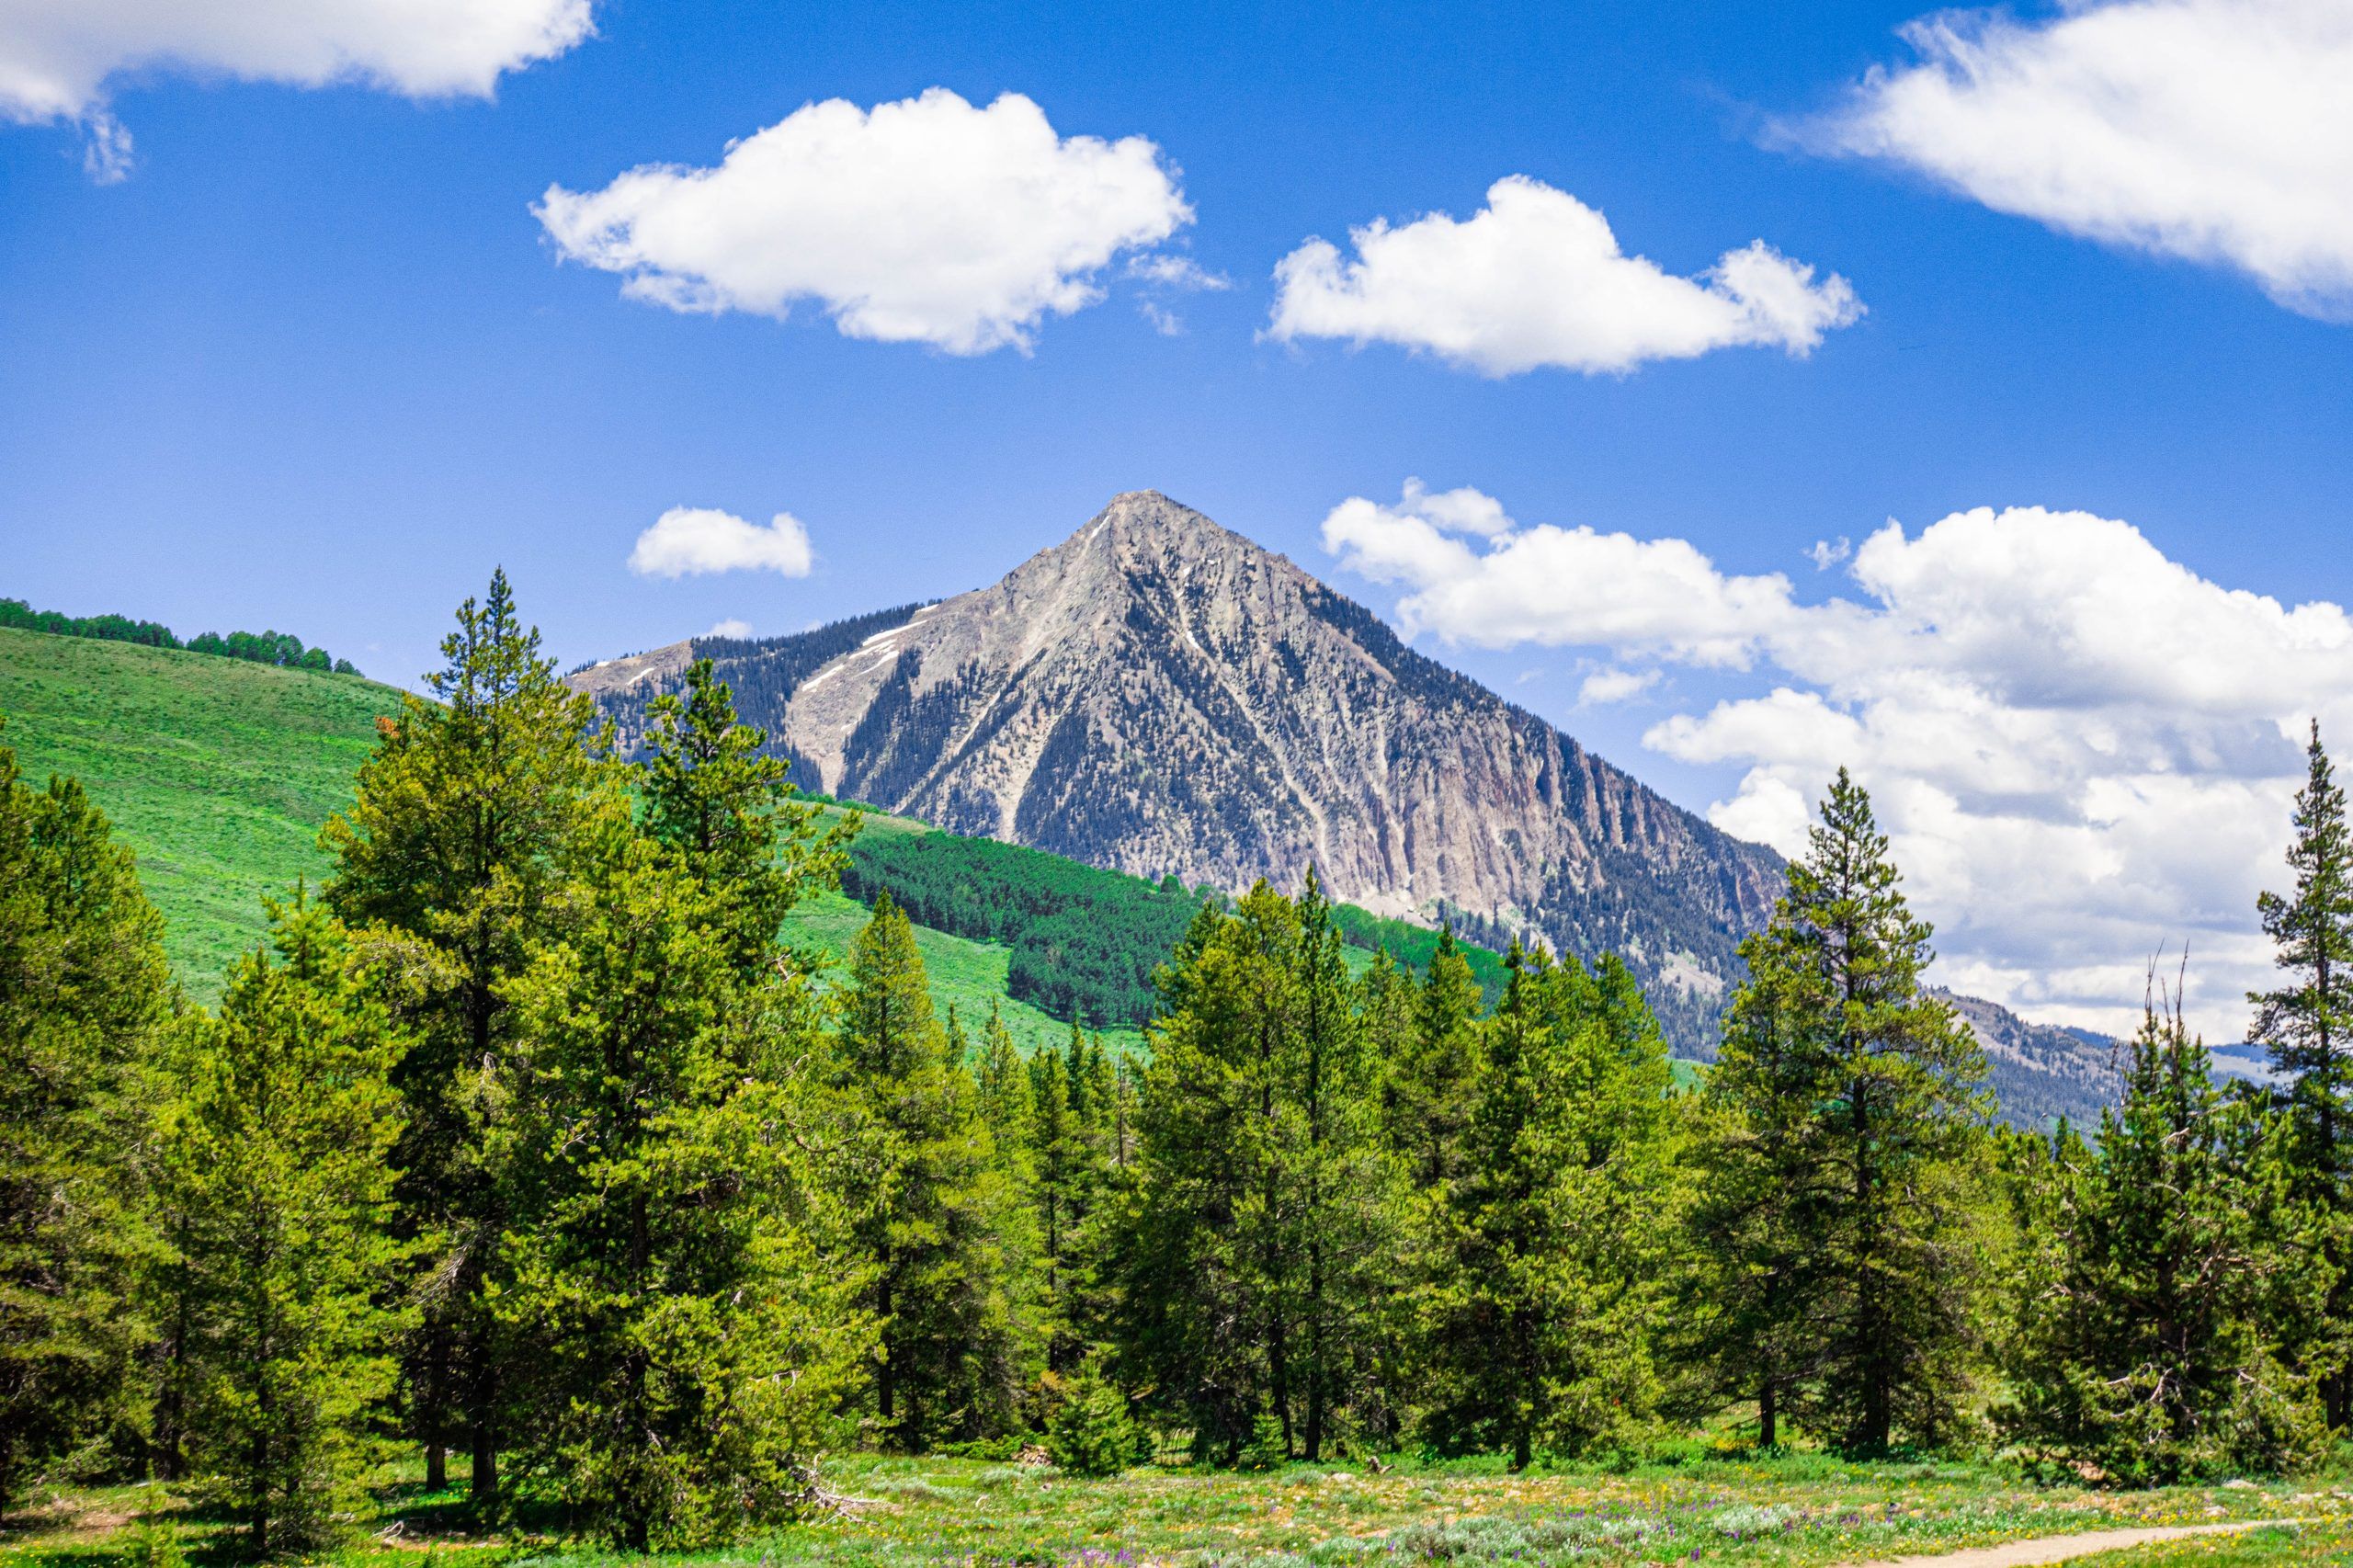 Crested Butte Mountain in Crested Butte, Colorado